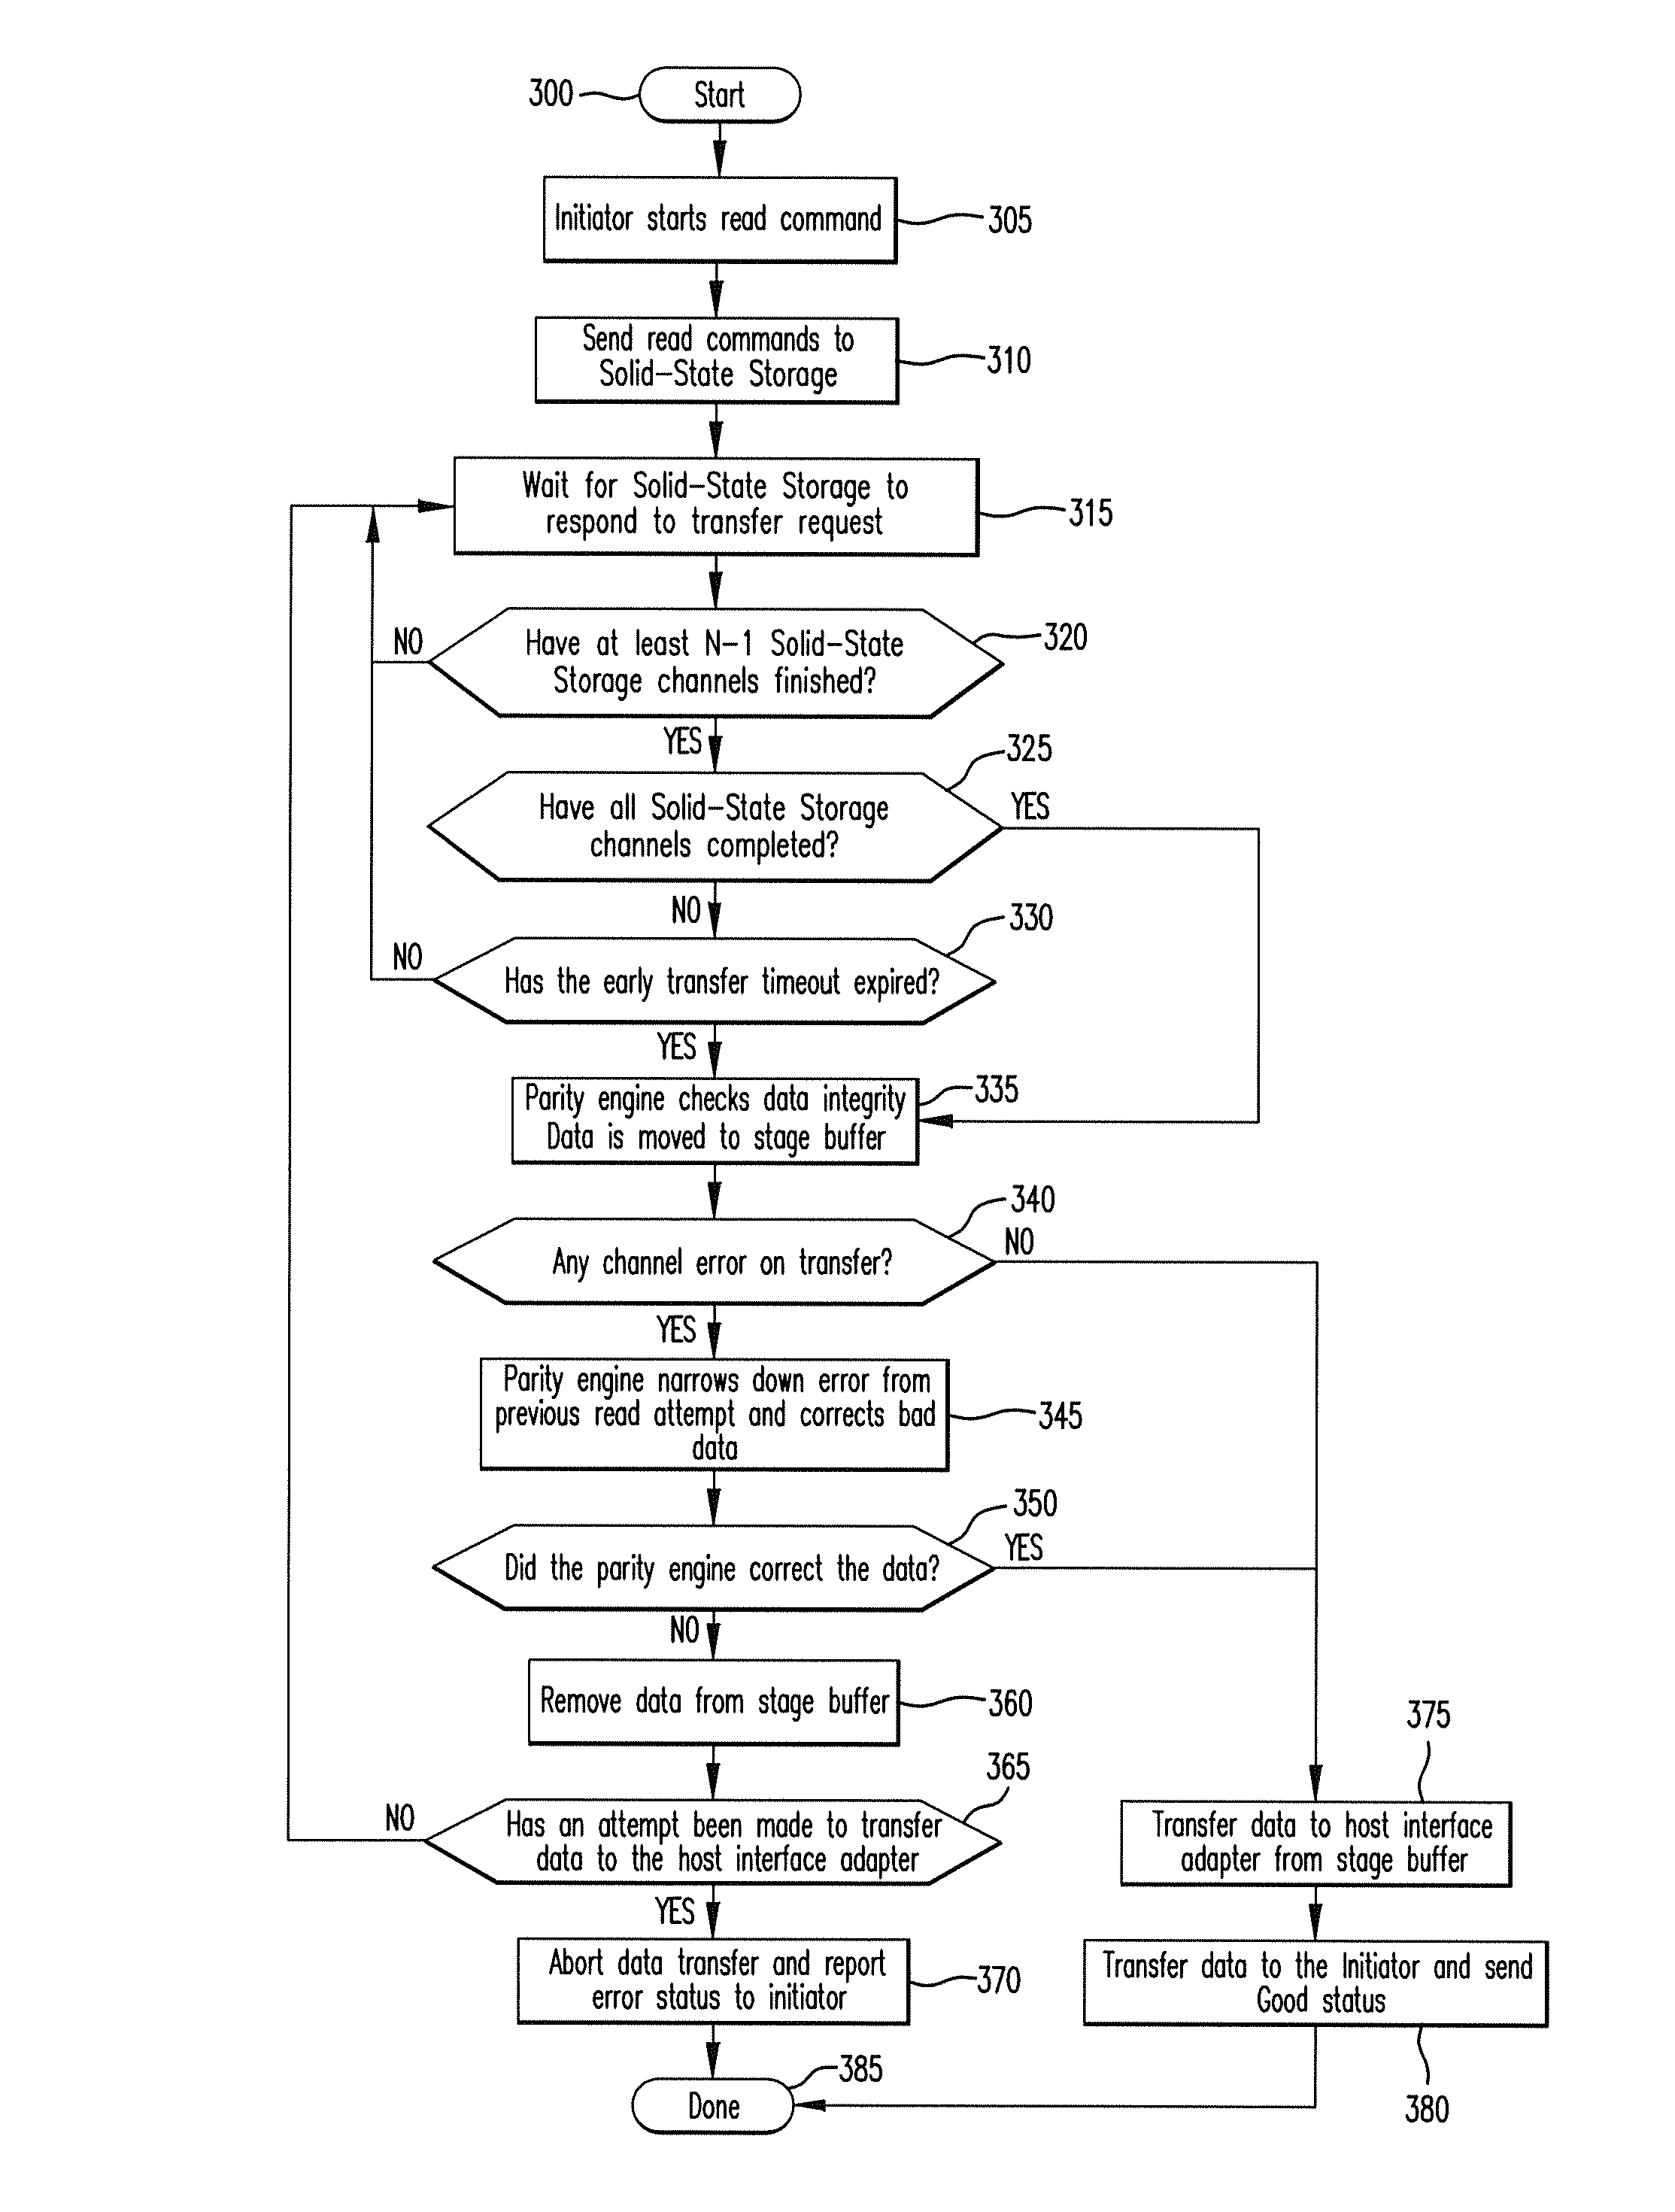 Method for reducing latency in a solid-state memory system while maintaining data integrity